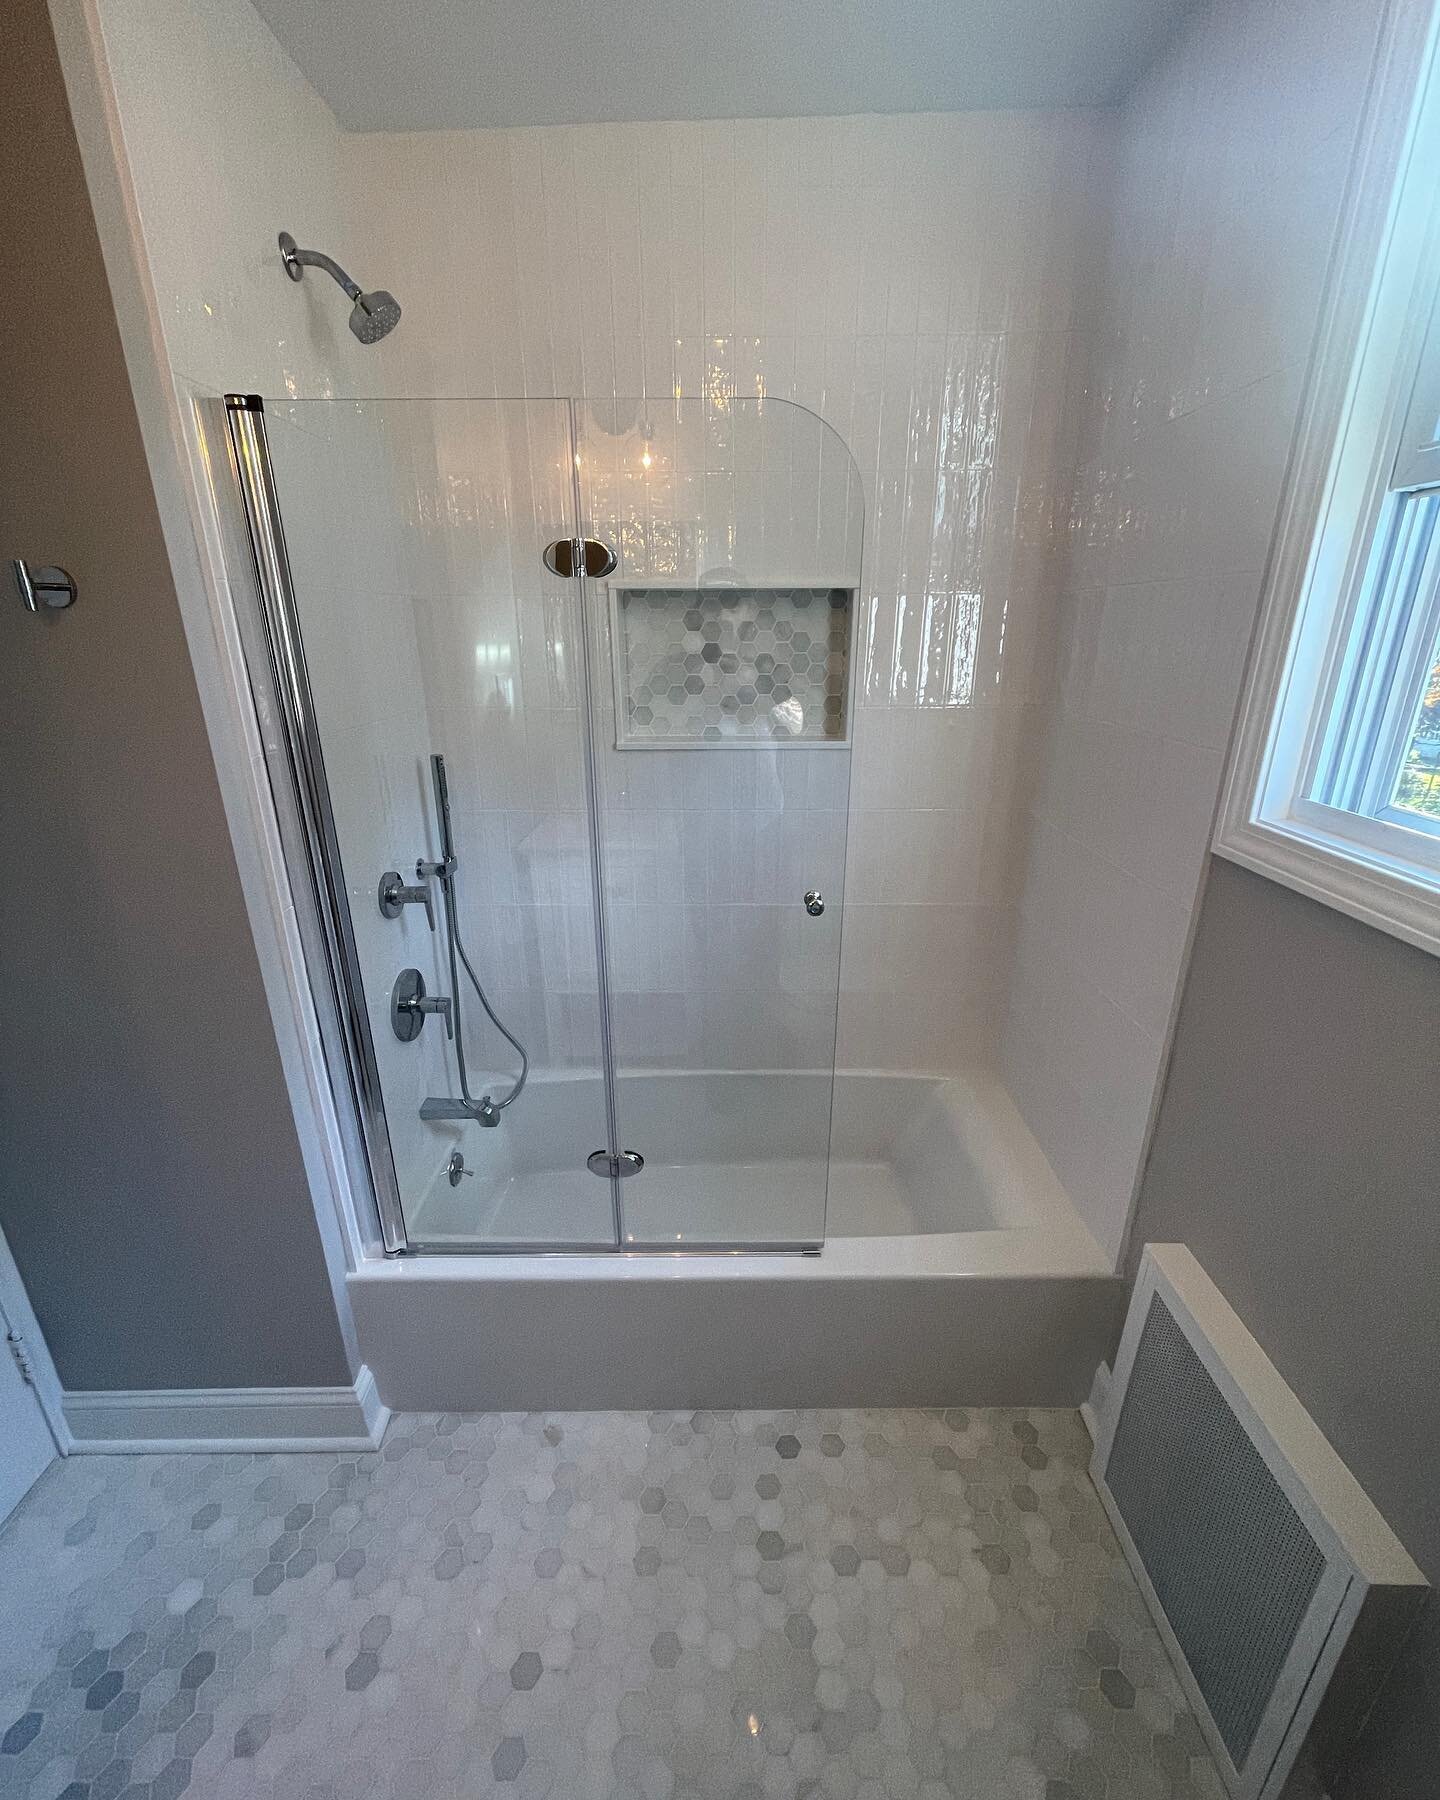 Bathroom remodel in Spring Glen. The original shower/tub gave out and wreaked having on the bathroom and the dining room below. 

After mitigating the asbestos, we went ahead with the bathroom restoration. 2 days of demo to remove the cement, metal l